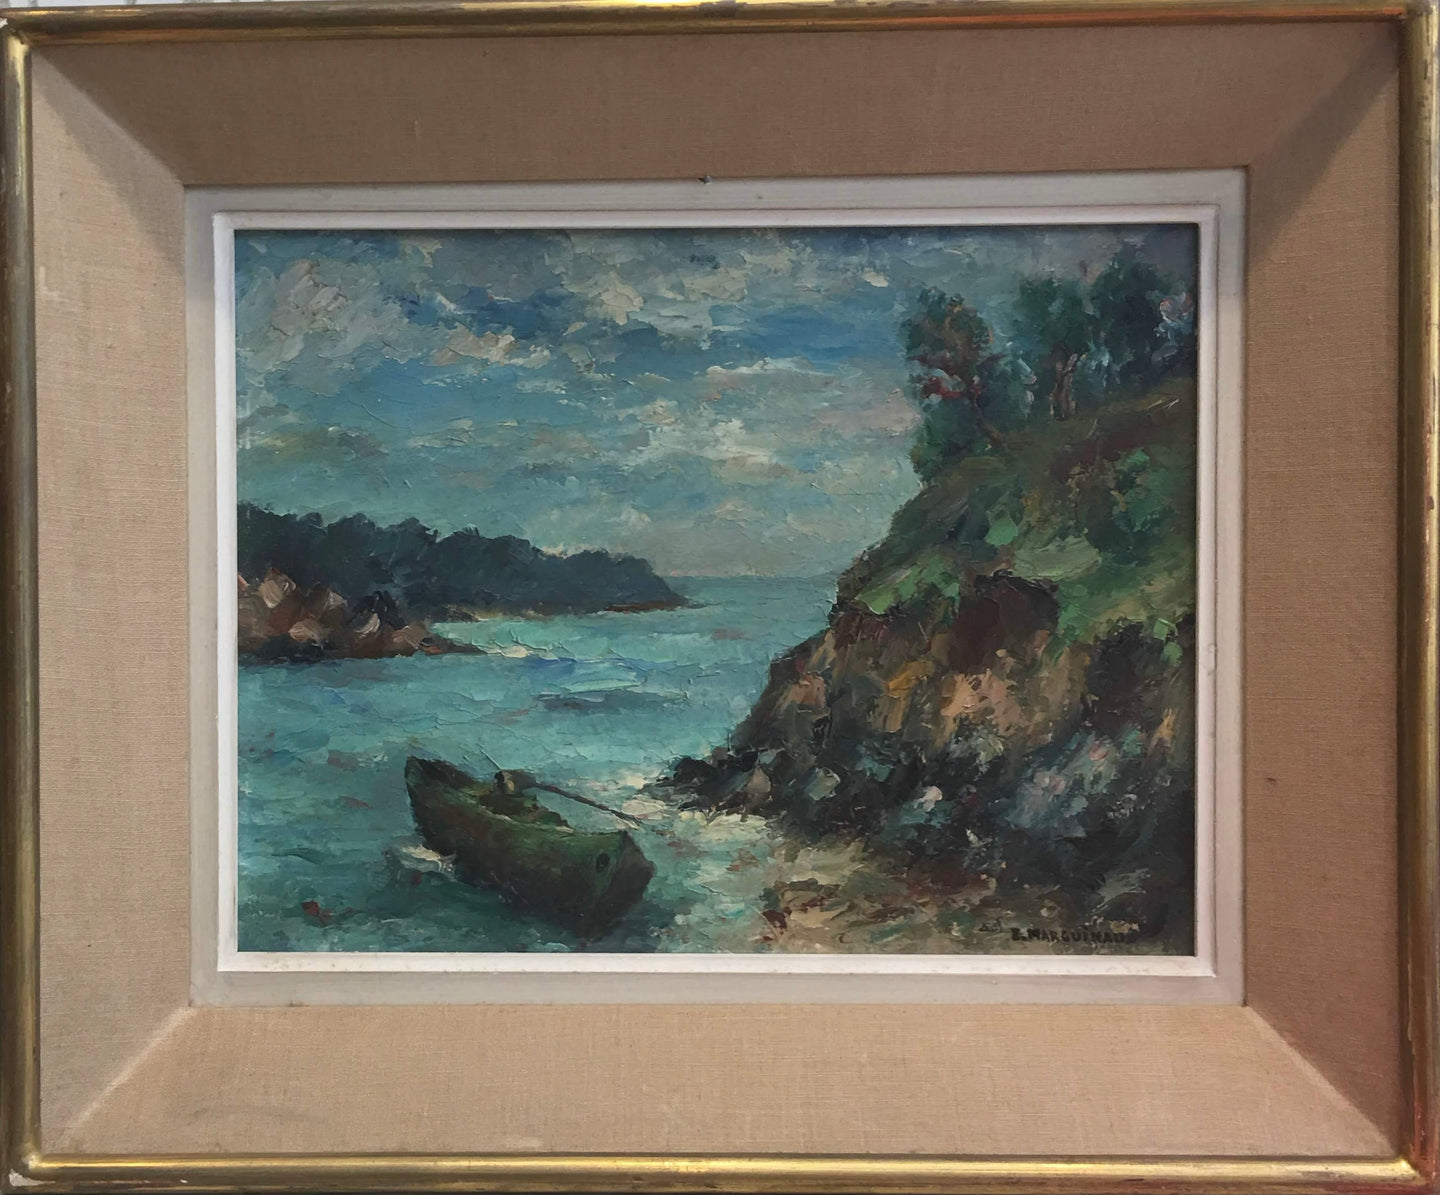 Original French Oil Painting Signed “Ernest Marguinaud” Dated 1946